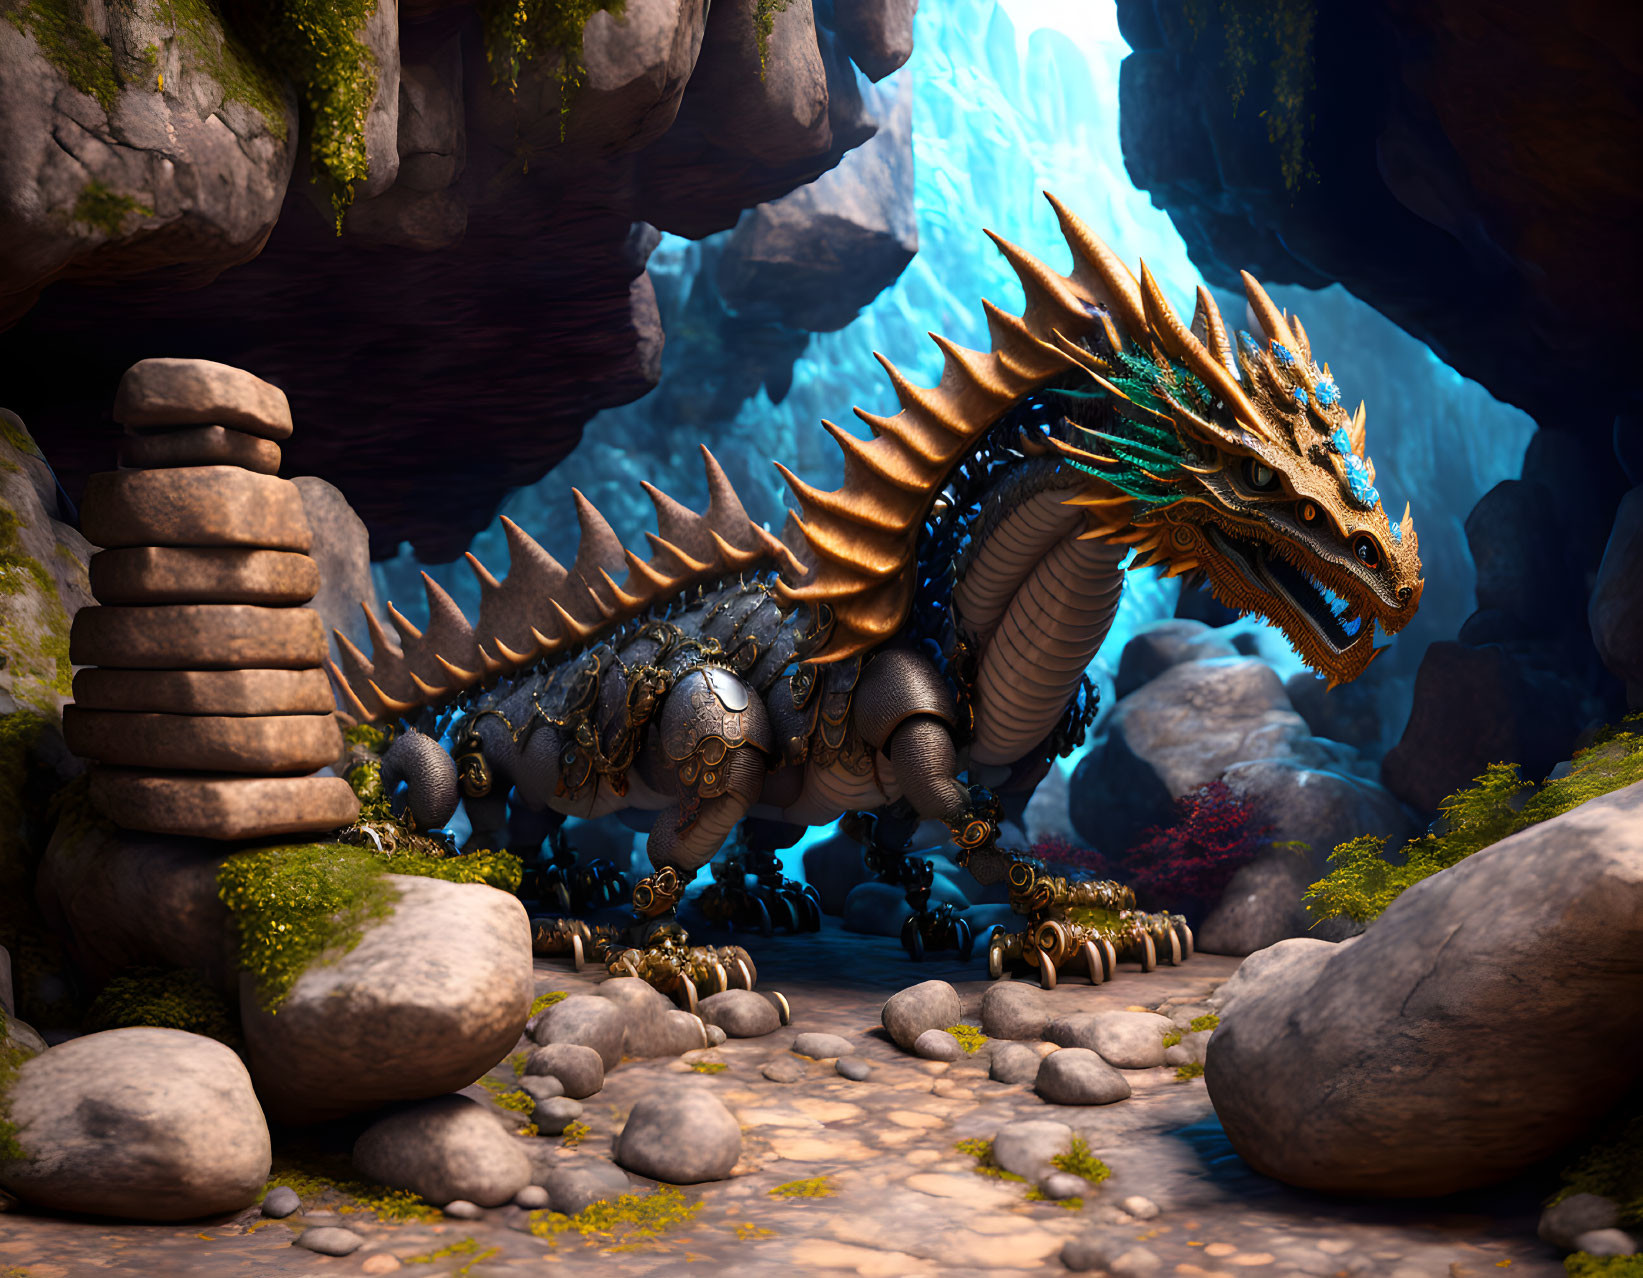 Armored dragon with gleaming scales in rocky cavern